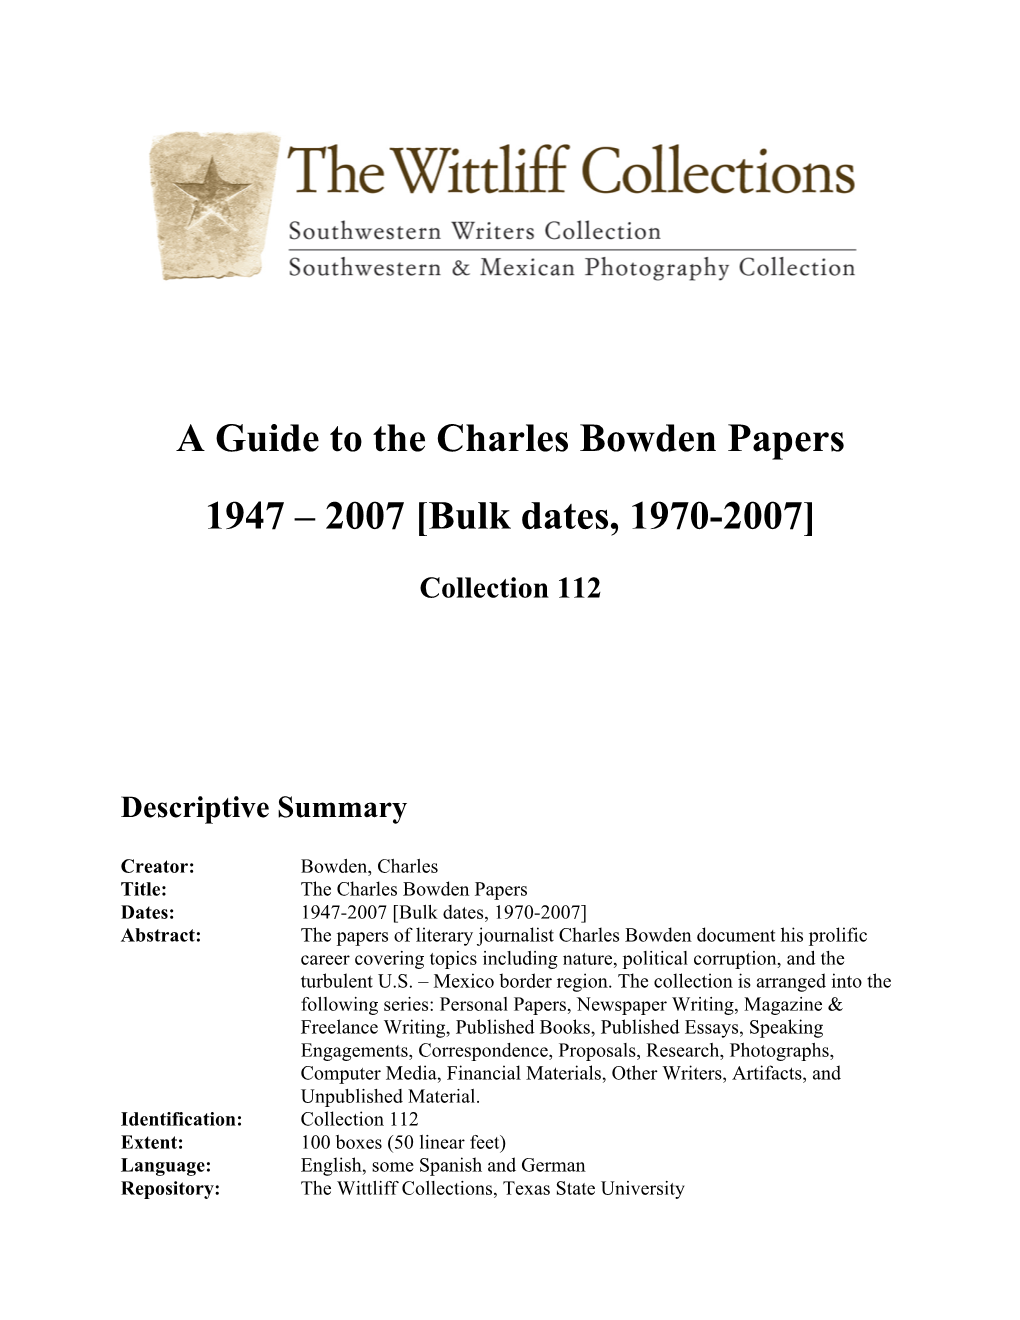 A Guide to the Charles Bowden Papers 1947 – 2007 [Bulk Dates, 1970-2007]